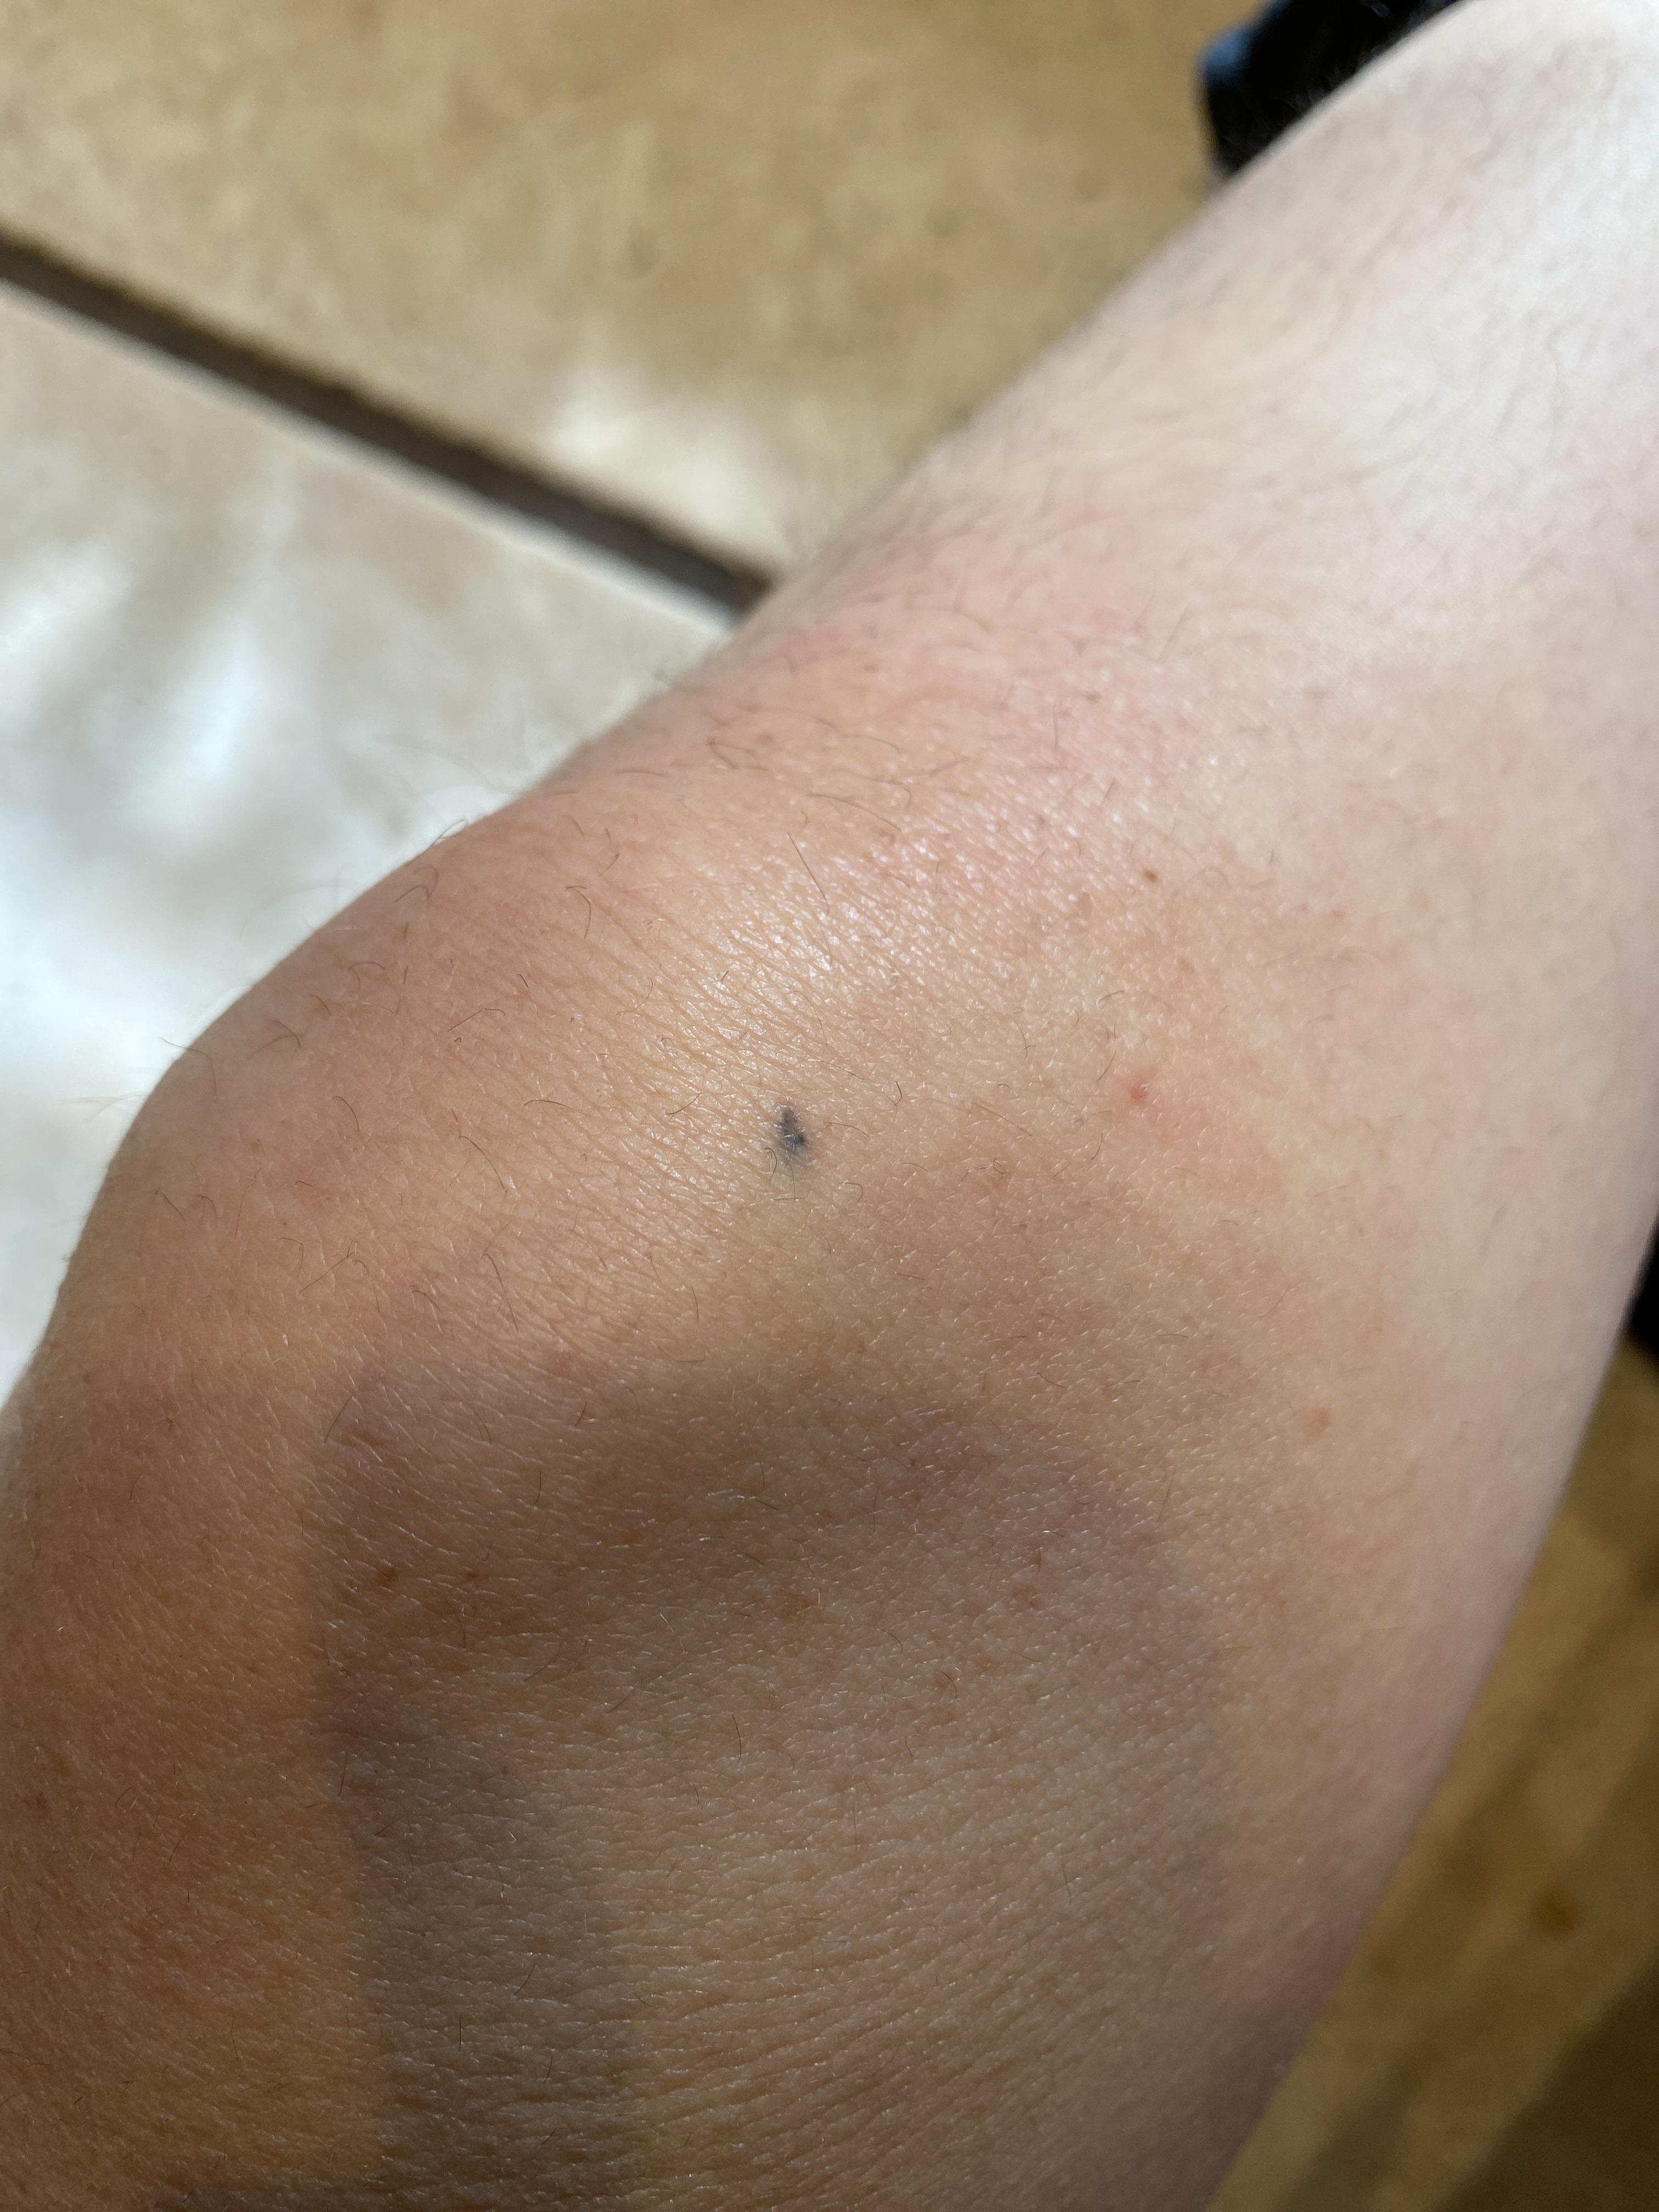 Close-up of a person&#x27;s arm showing a bruise with a small dark mark, possibly a freckle or mole